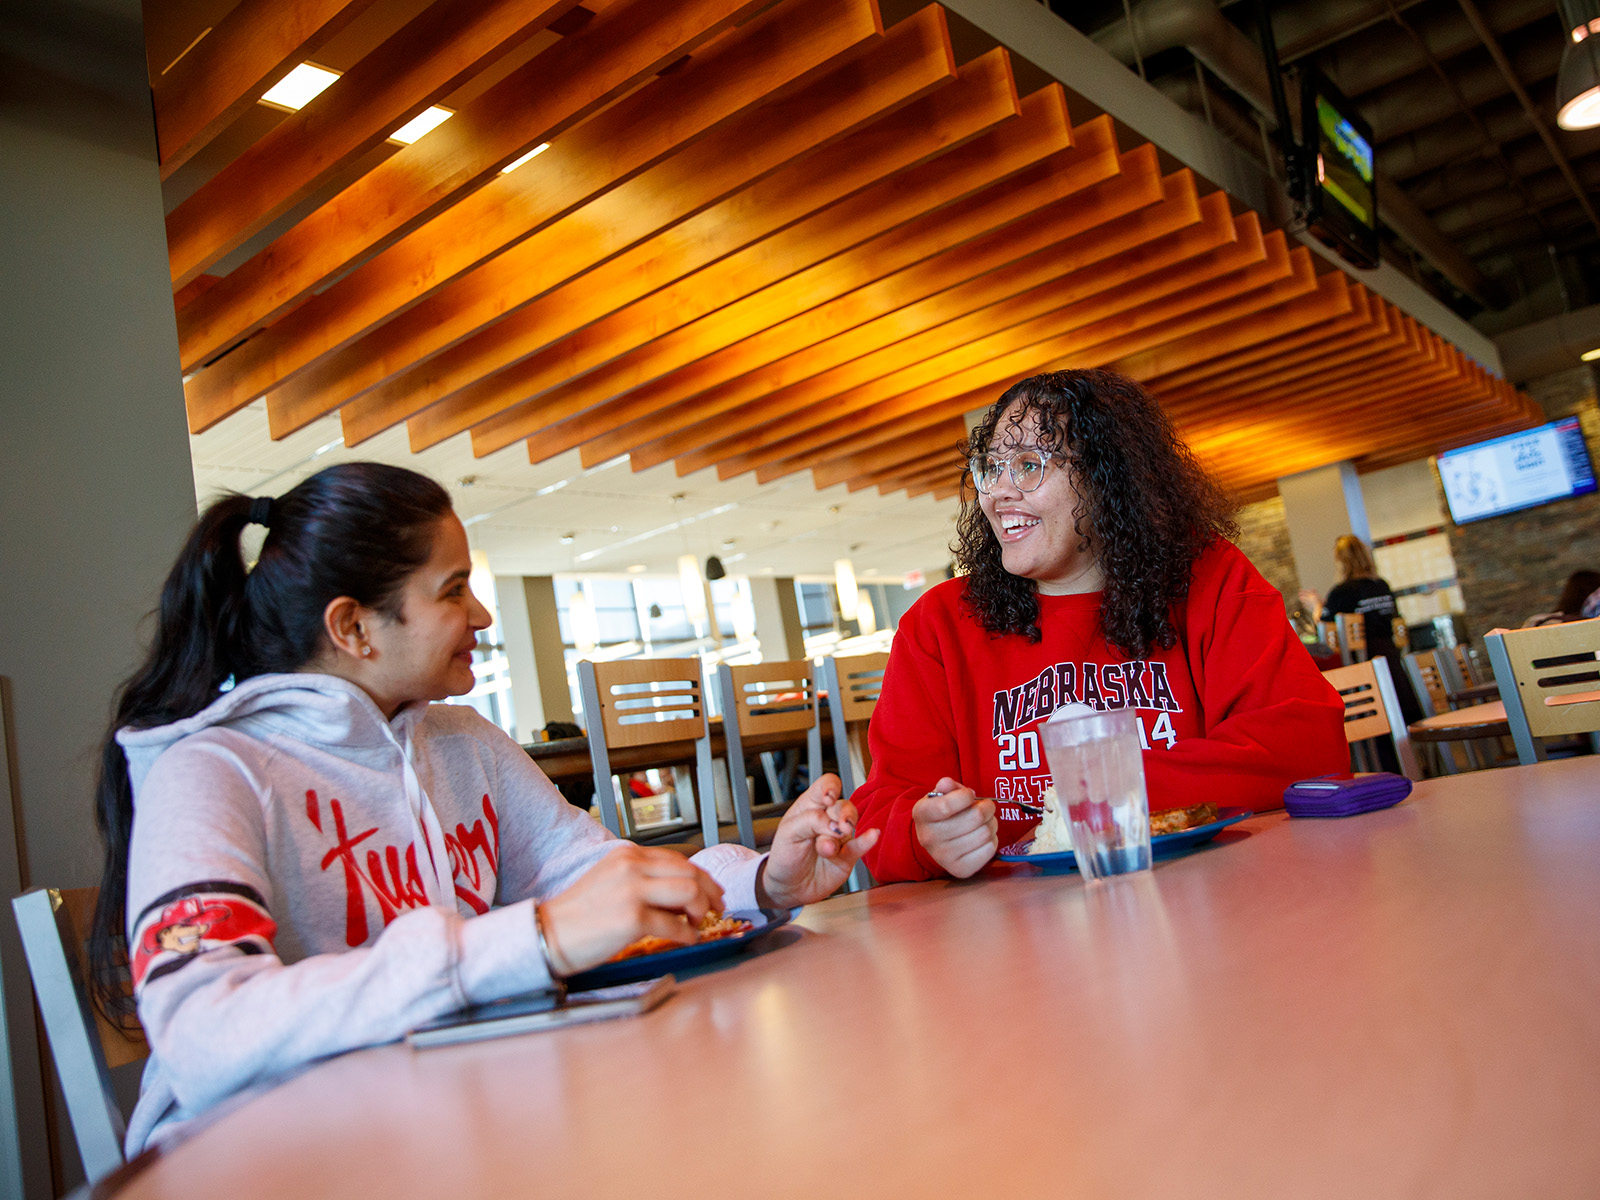 Students enjoy food and conversation in the Abel Dining Center.